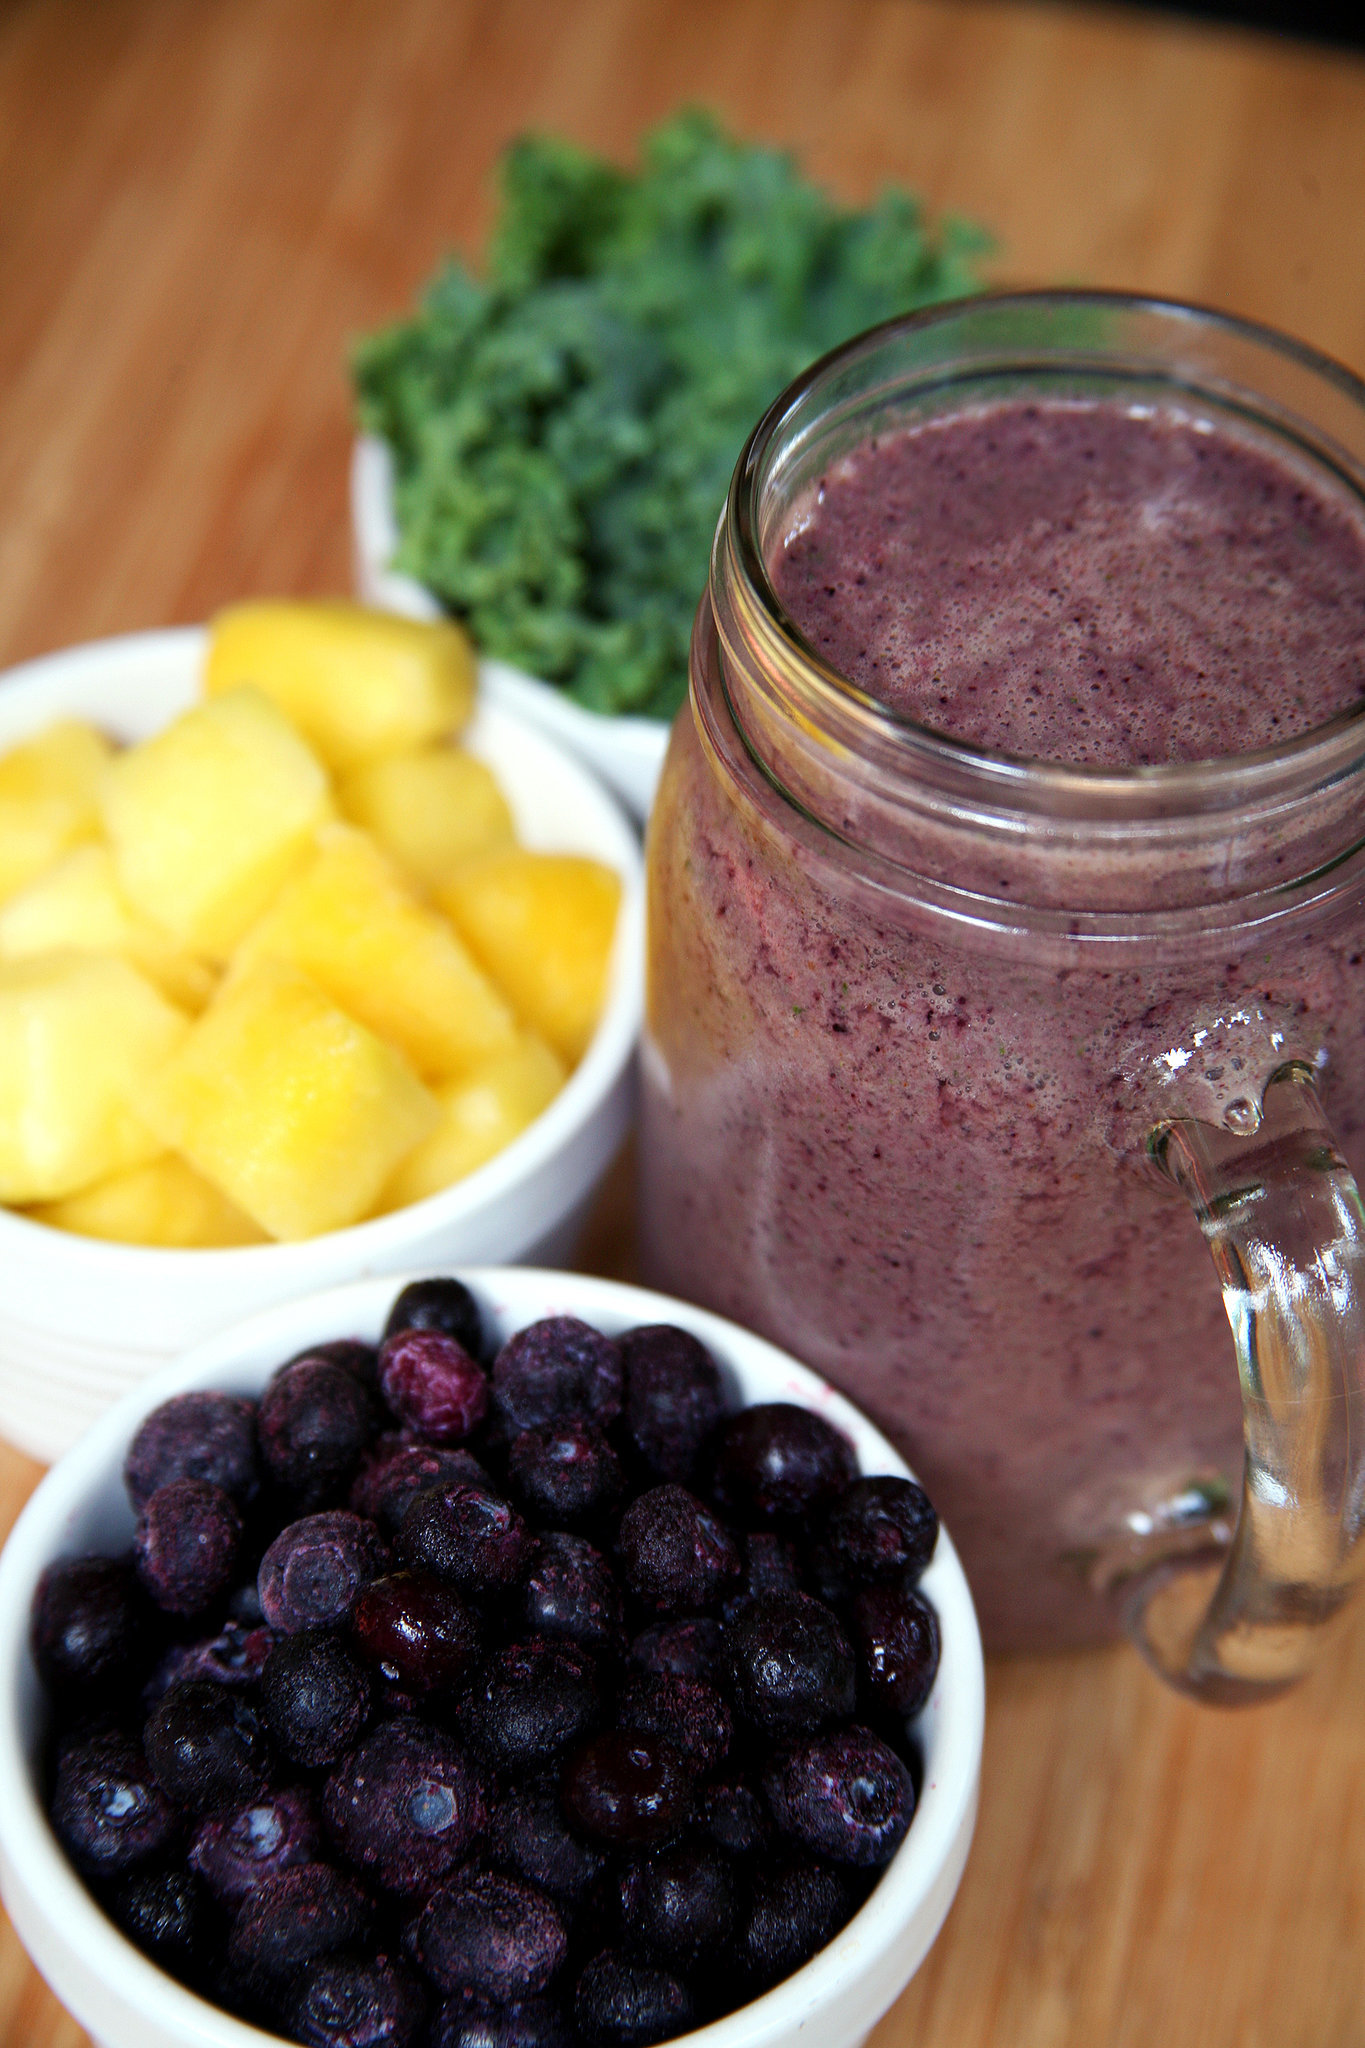 Want a Flat Belly? This Smoothie Will Help Get You There